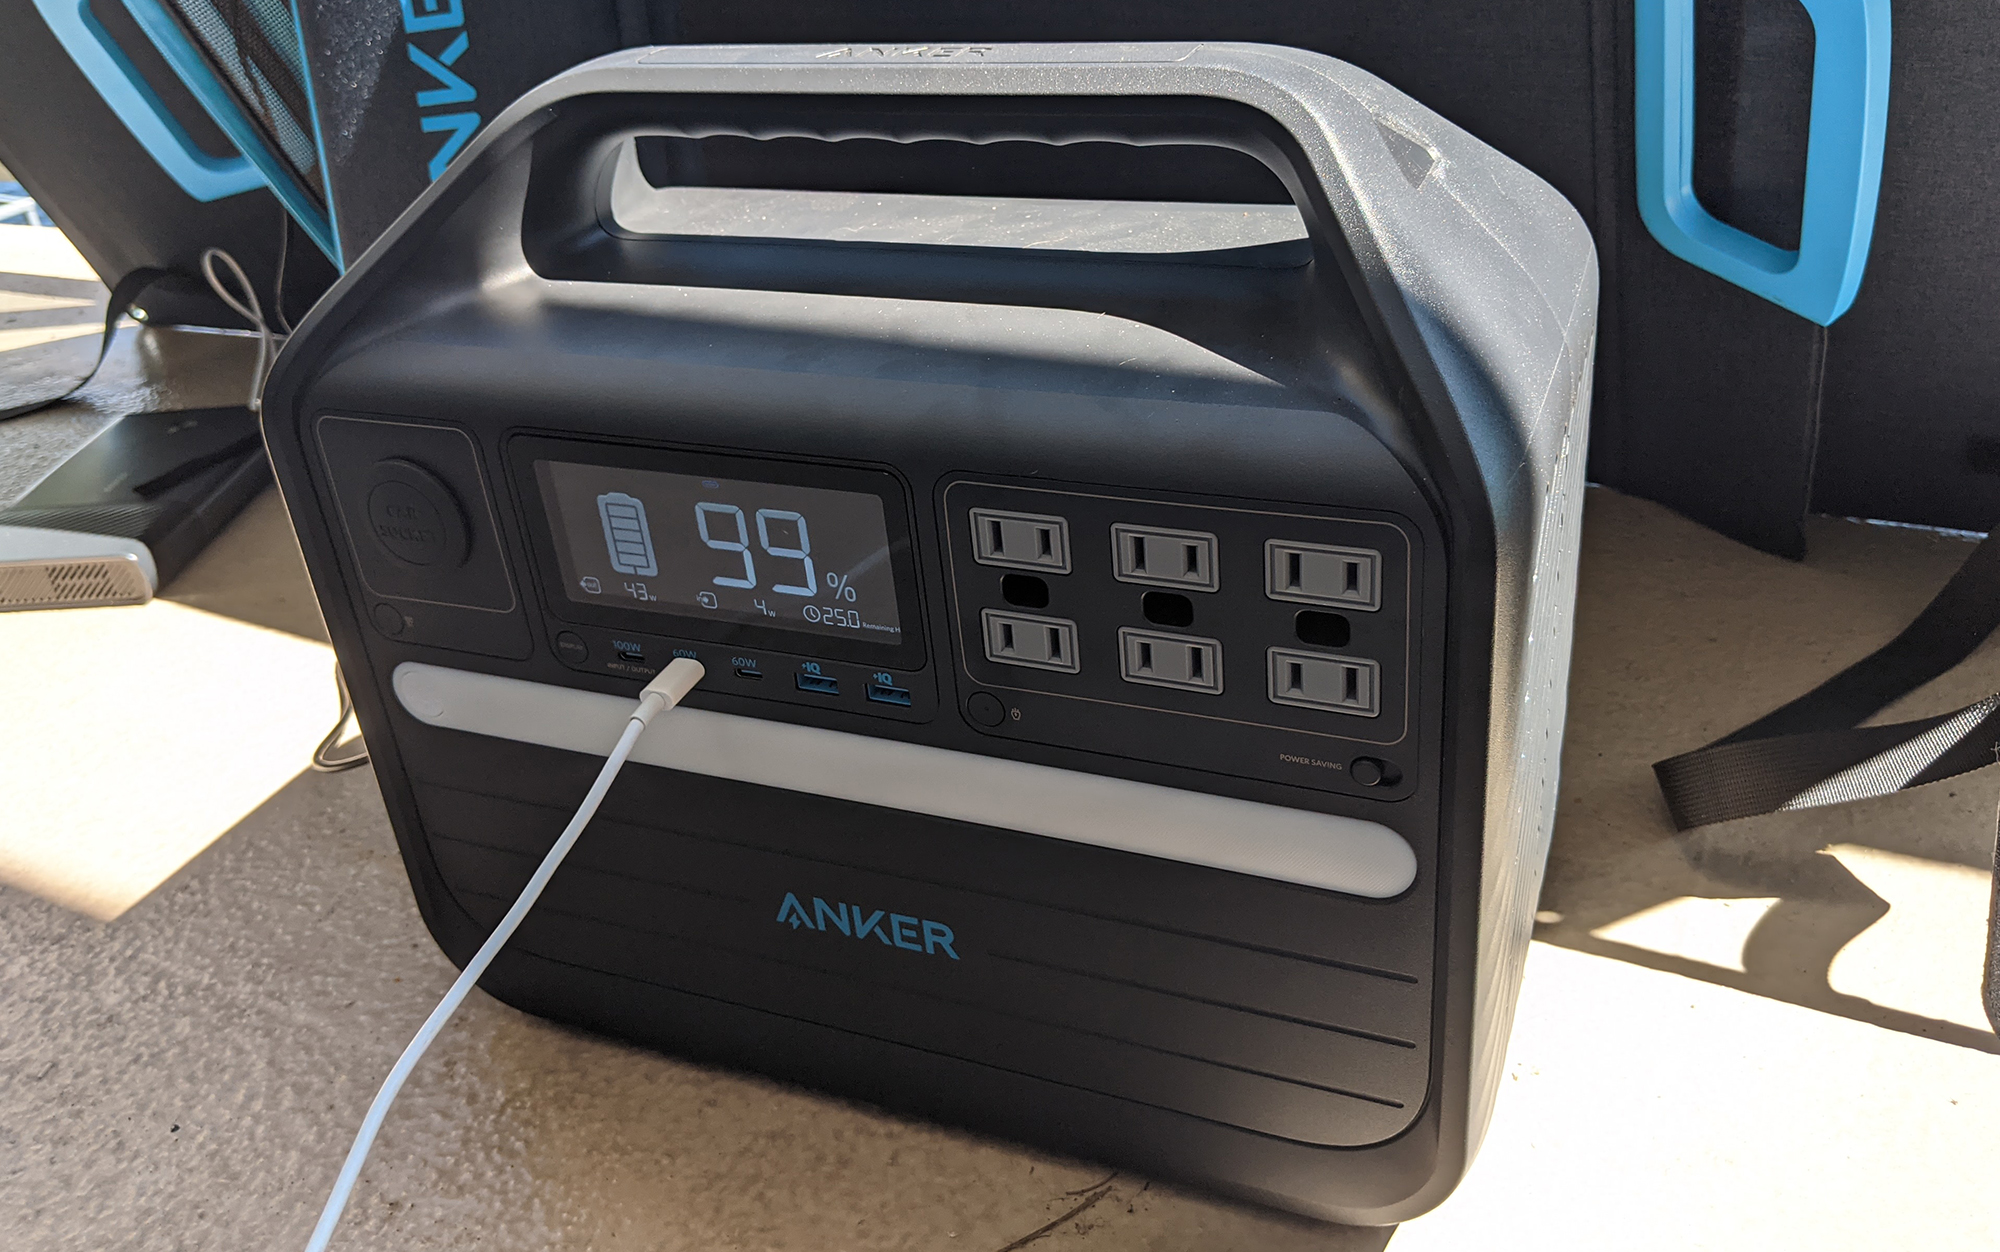 I was able to charge two power banks simultaneously from the Anker 625 Solar Panel while charging my phone from the Anker 555 PowerHouse. 